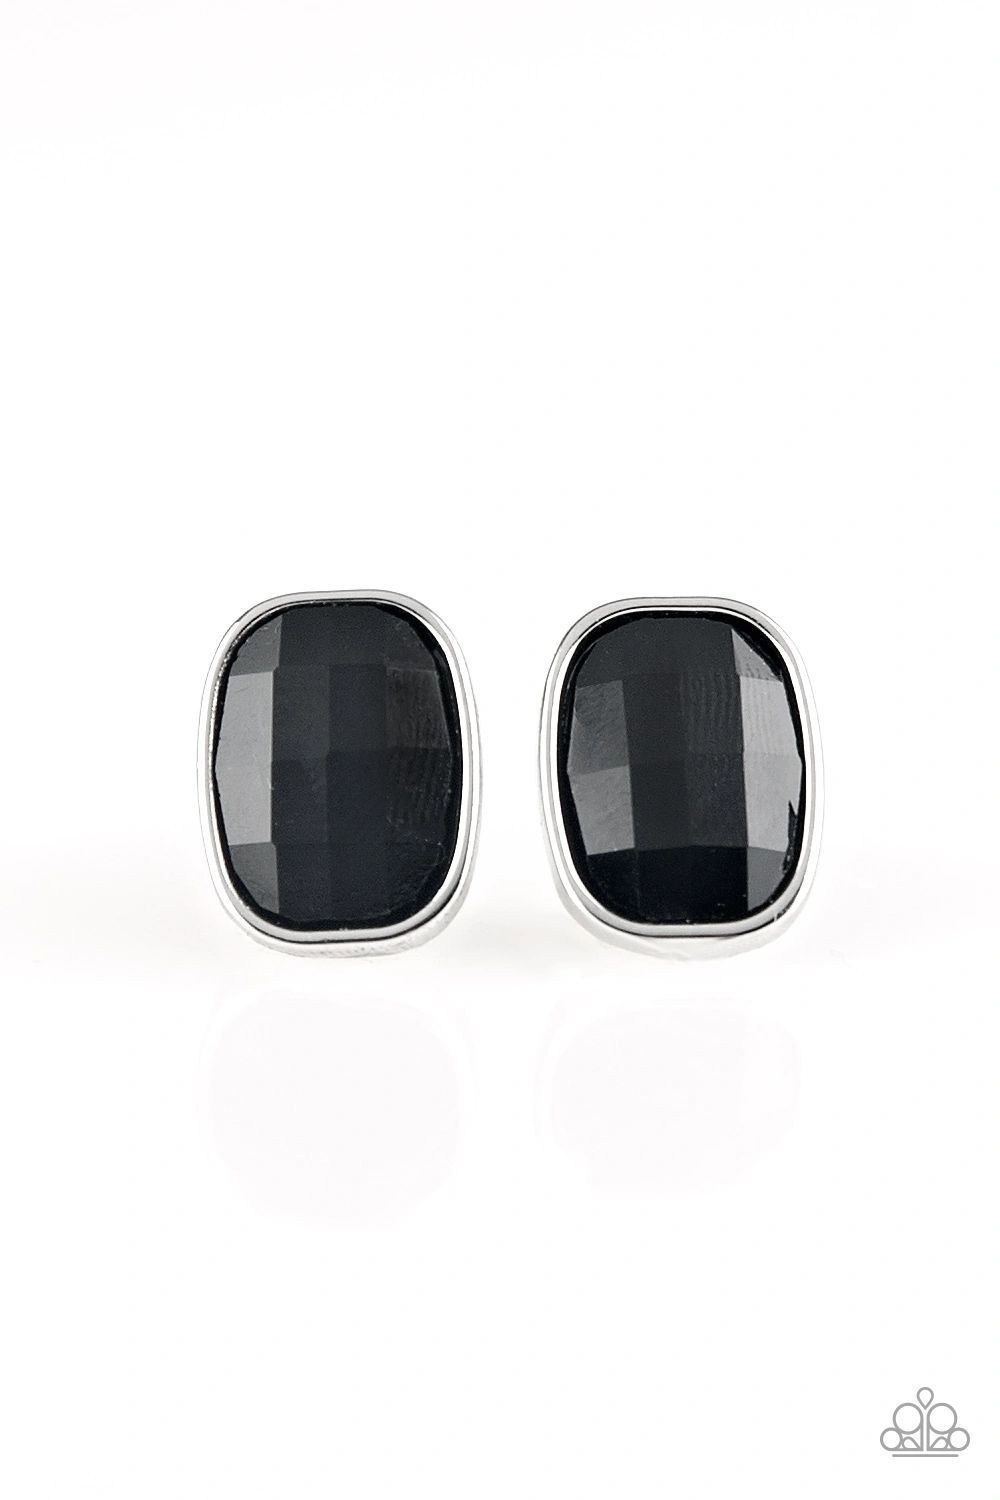 Incredibly Iconic Black Post Earrings - Paparazzi Accessories - lightbox -CarasShop.com - $5 Jewelry by Cara Jewels